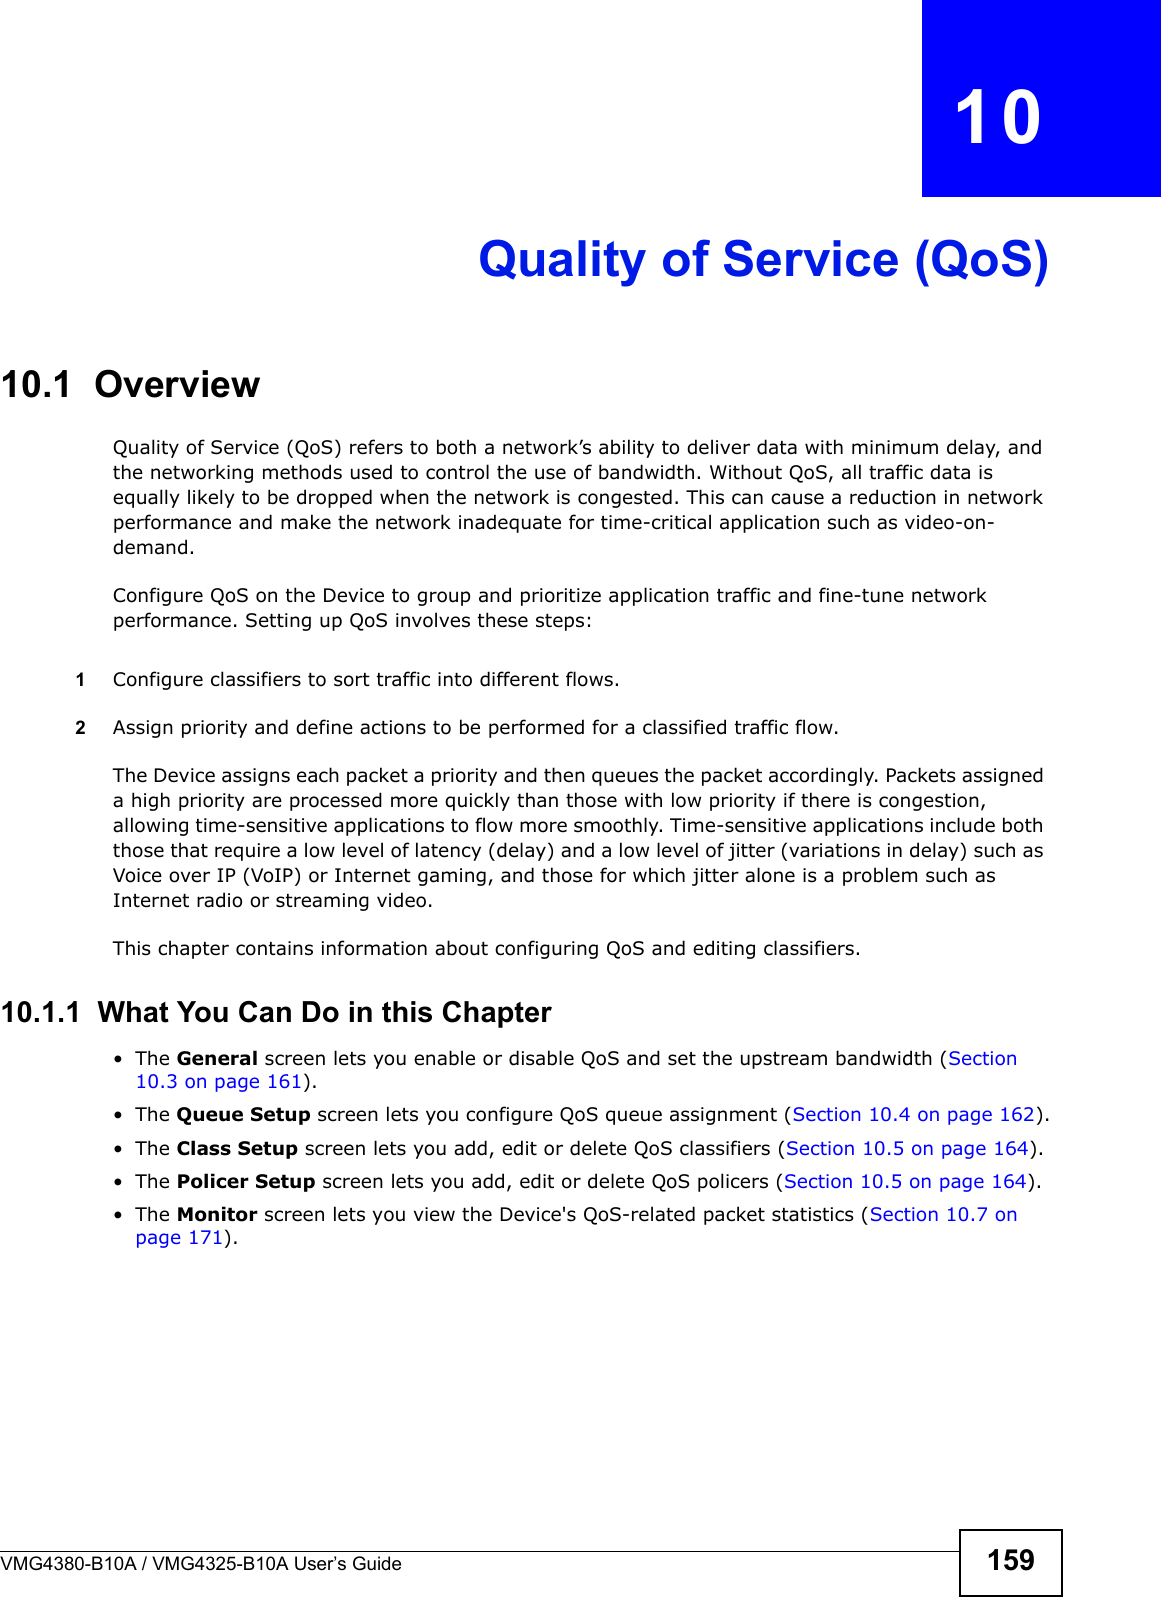 VMG4380-B10A / VMG4325-B10A User’s Guide 159CHAPTER  10Quality of Service (QoS)10.1  Overview Quality of Service (QoS) refers to both a network’s ability to deliver data with minimum delay, and the networking methods used to control the use of bandwidth. Without QoS, all traffic data is equally likely to be dropped when the network is congested. This can cause a reduction in network performance and make the network inadequate for time-critical application such as video-on-demand.Configure QoS on the Device to group and prioritize application traffic and fine-tune networkperformance. Setting up QoS involves these steps:1Configure classifiers to sort traffic into different flows. 2Assign priority and define actions to be performed for a classified traffic flow. The Device assigns each packet a priority and then queues the packet accordingly. Packets assigned a high priority are processed more quickly than those with low priority if there is congestion, allowing time-sensitive applications to flow more smoothly. Time-sensitive applications include both those that require a low level of latency (delay) and a low level of jitter (variations in delay) such as Voice over IP (VoIP) or Internet gaming, and those for which jitter alone is a problem such asInternet radio or streaming video.This chapter contains information about configuring QoS and editing classifiers.10.1.1  What You Can Do in this Chapter• The General screen lets you enable or disable QoS and set the upstream bandwidth (Section 10.3 on page 161).• The Queue Setup screen lets you configure QoS queue assignment (Section 10.4 on page 162).• The Class Setup screen lets you add, edit or delete QoS classifiers (Section 10.5 on page 164).• The Policer Setup screen lets you add, edit or delete QoS policers (Section 10.5 on page 164).• The Monitor screen lets you view the Device&apos;s QoS-related packet statistics (Section 10.7 on page 171).